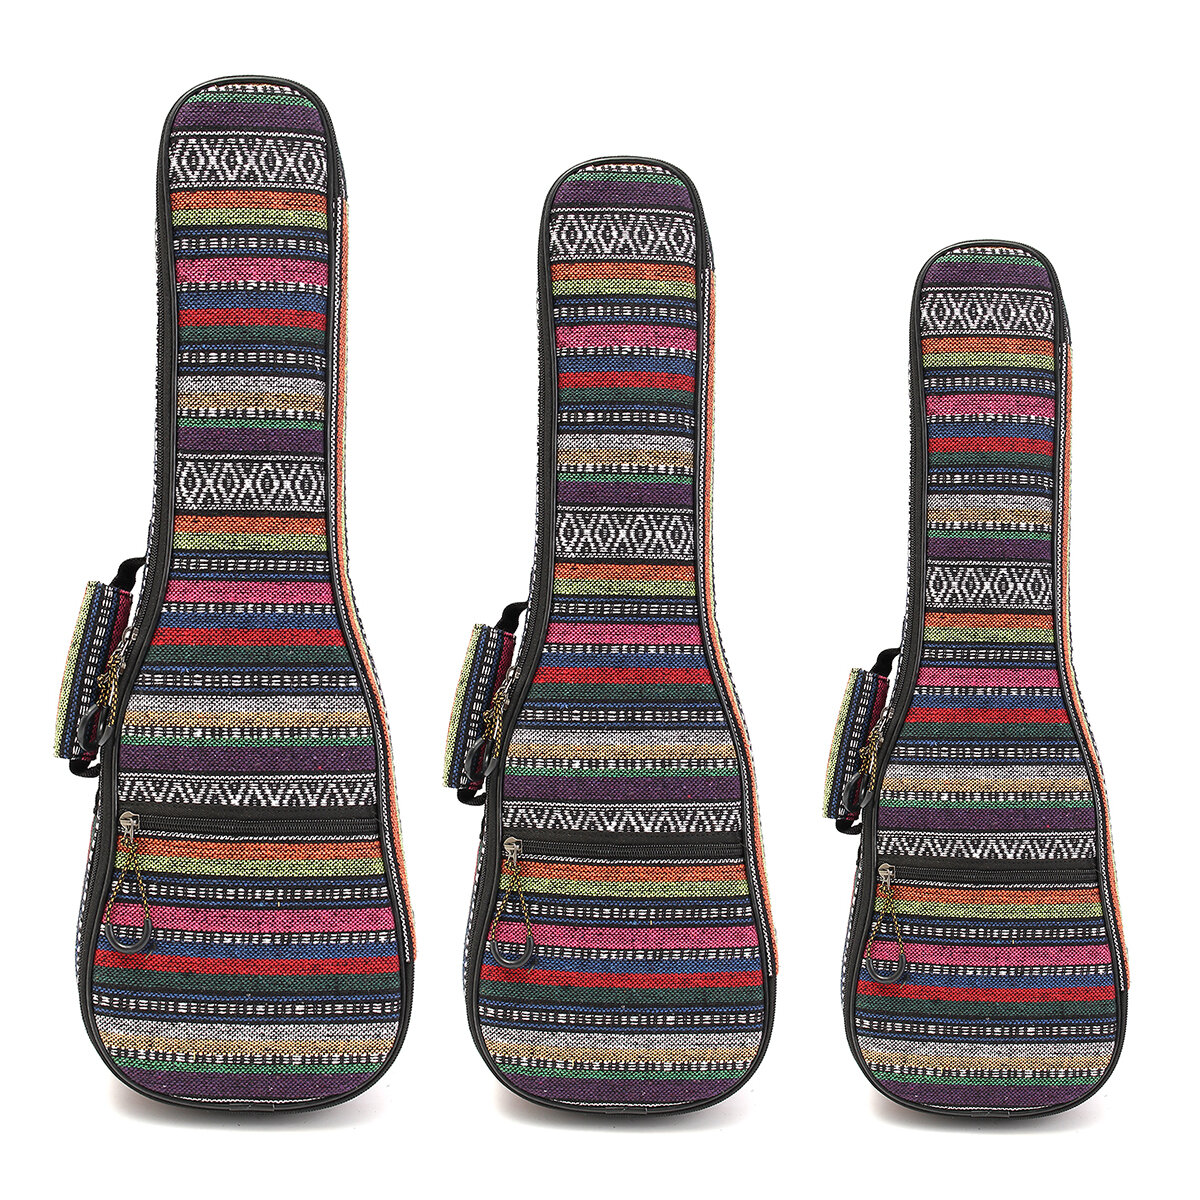 21 23 26 Inch Double Strap Hand Folk Canvas Ukulele Case Soft Gewatteerde Carry Protect Rugzak Cover